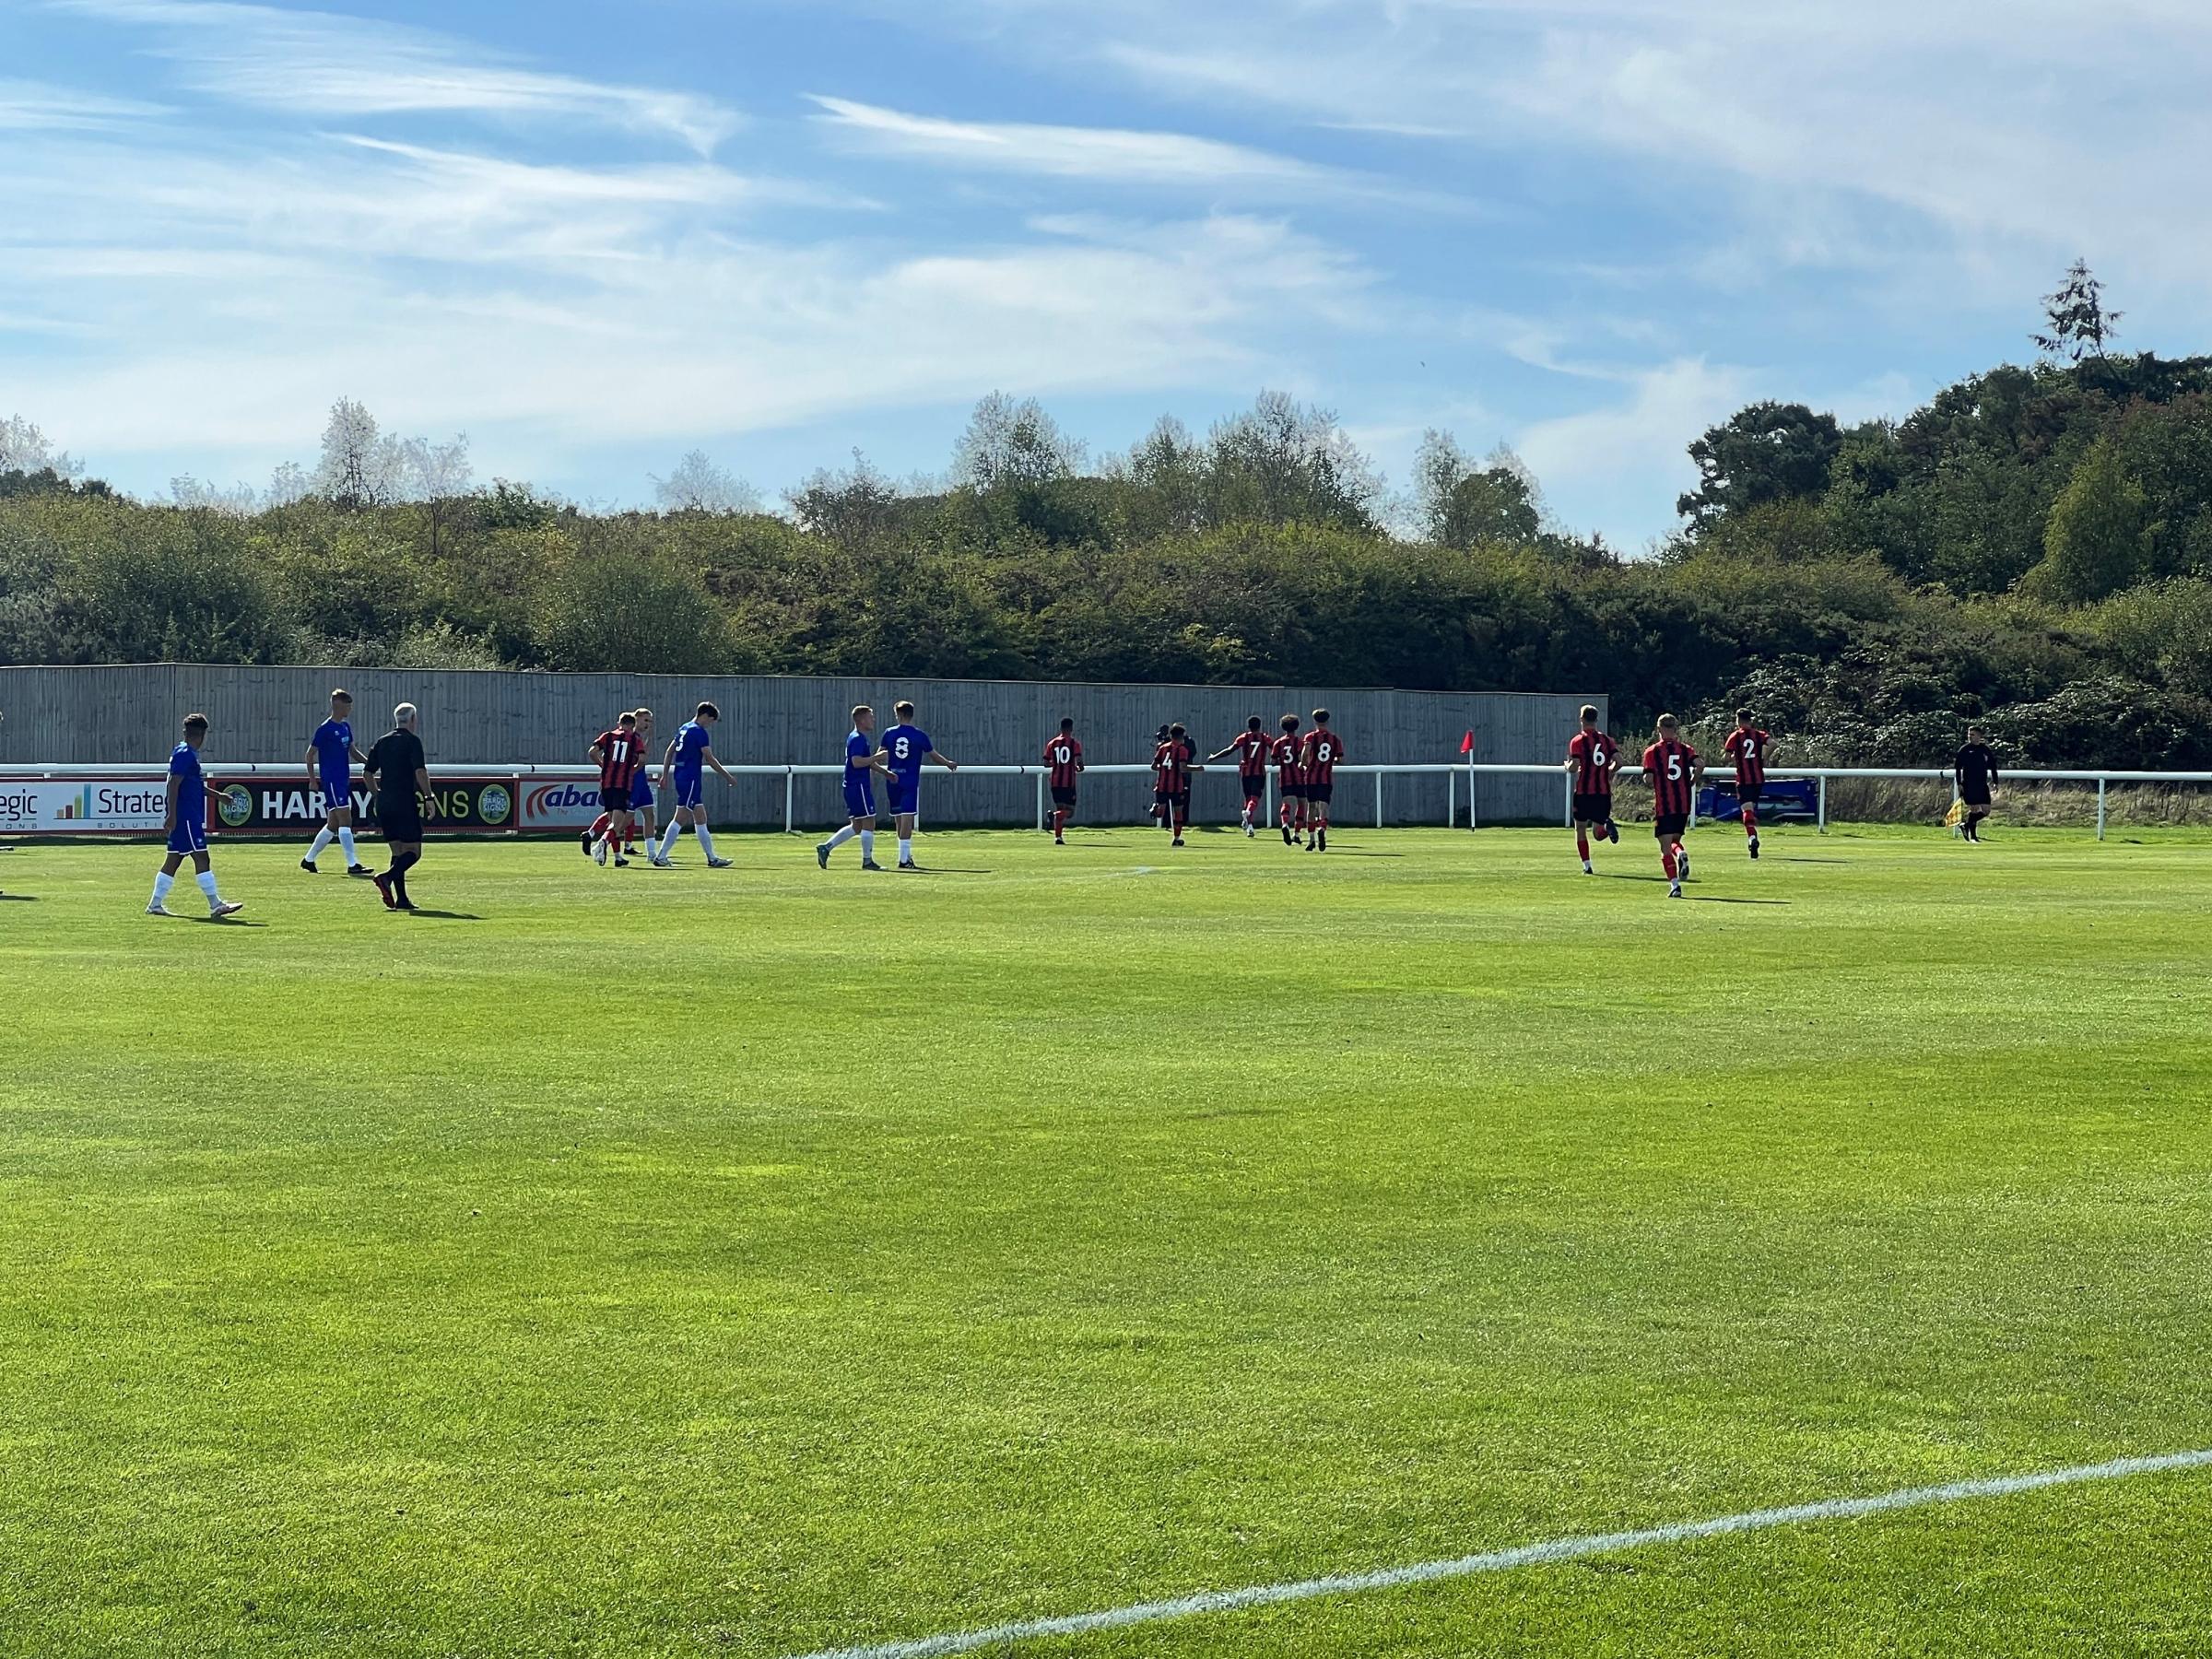 Connell's Cherries bounce back with resounding 4-0 win over Cheltenham Town